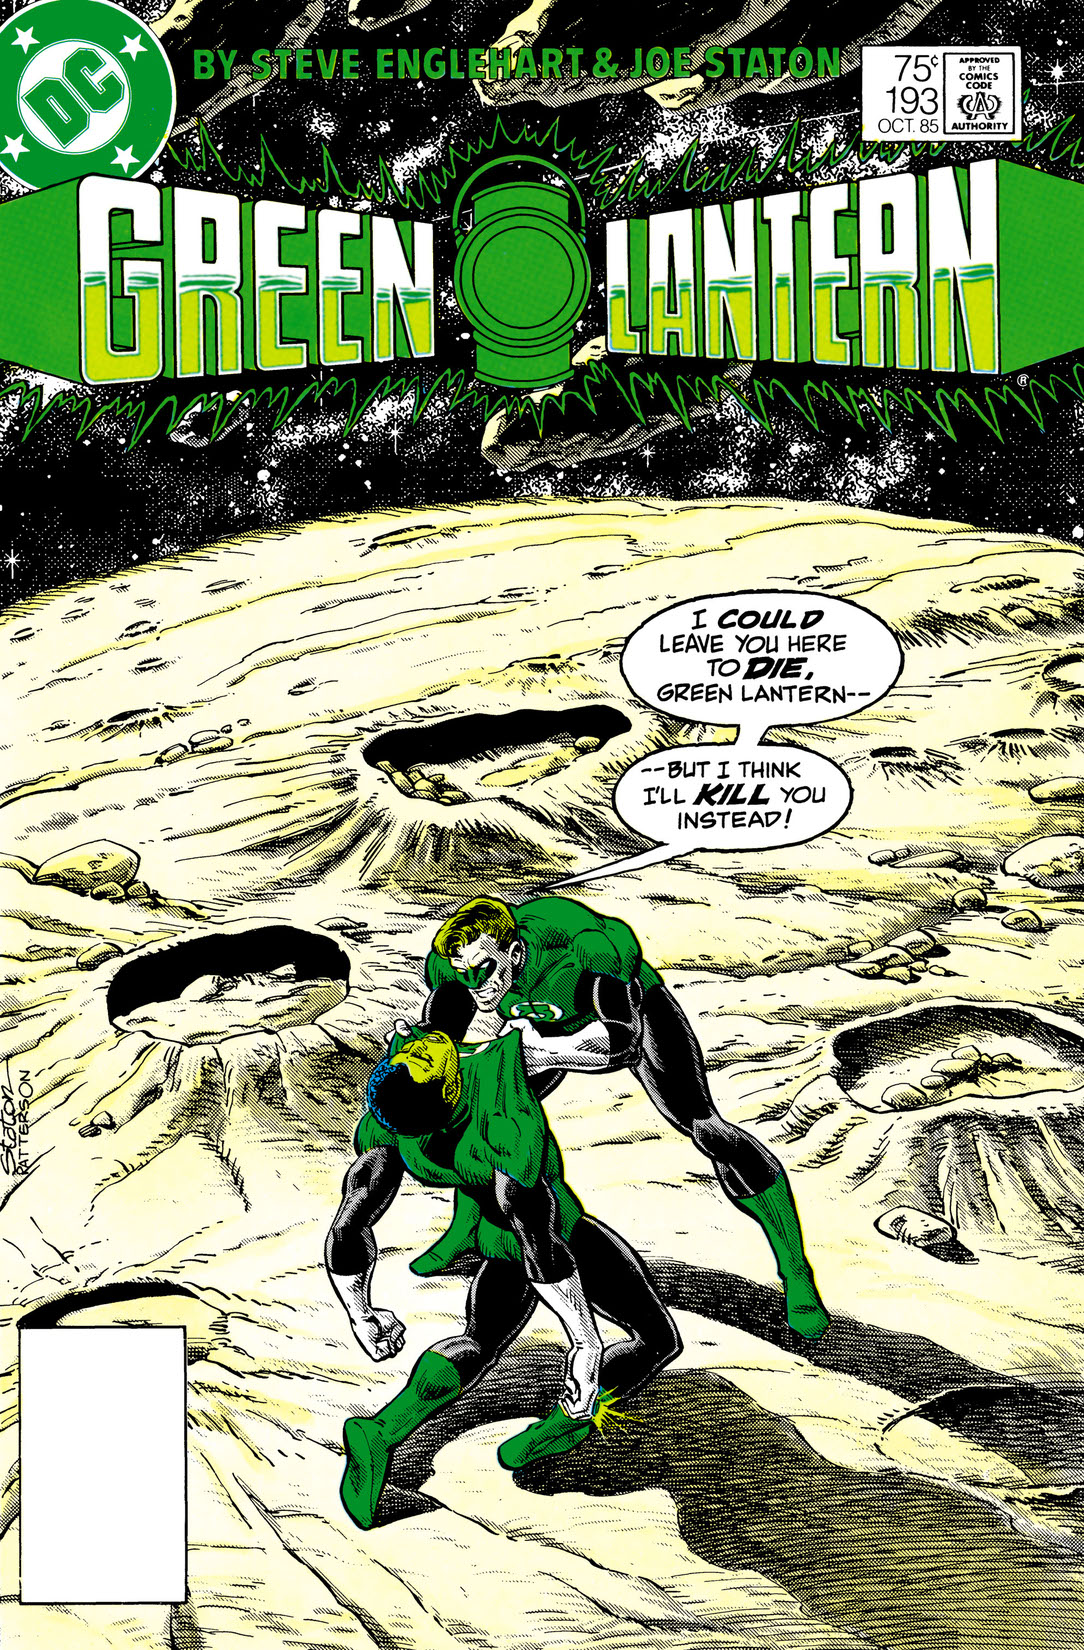 Green Lantern (1960-) #193 preview images